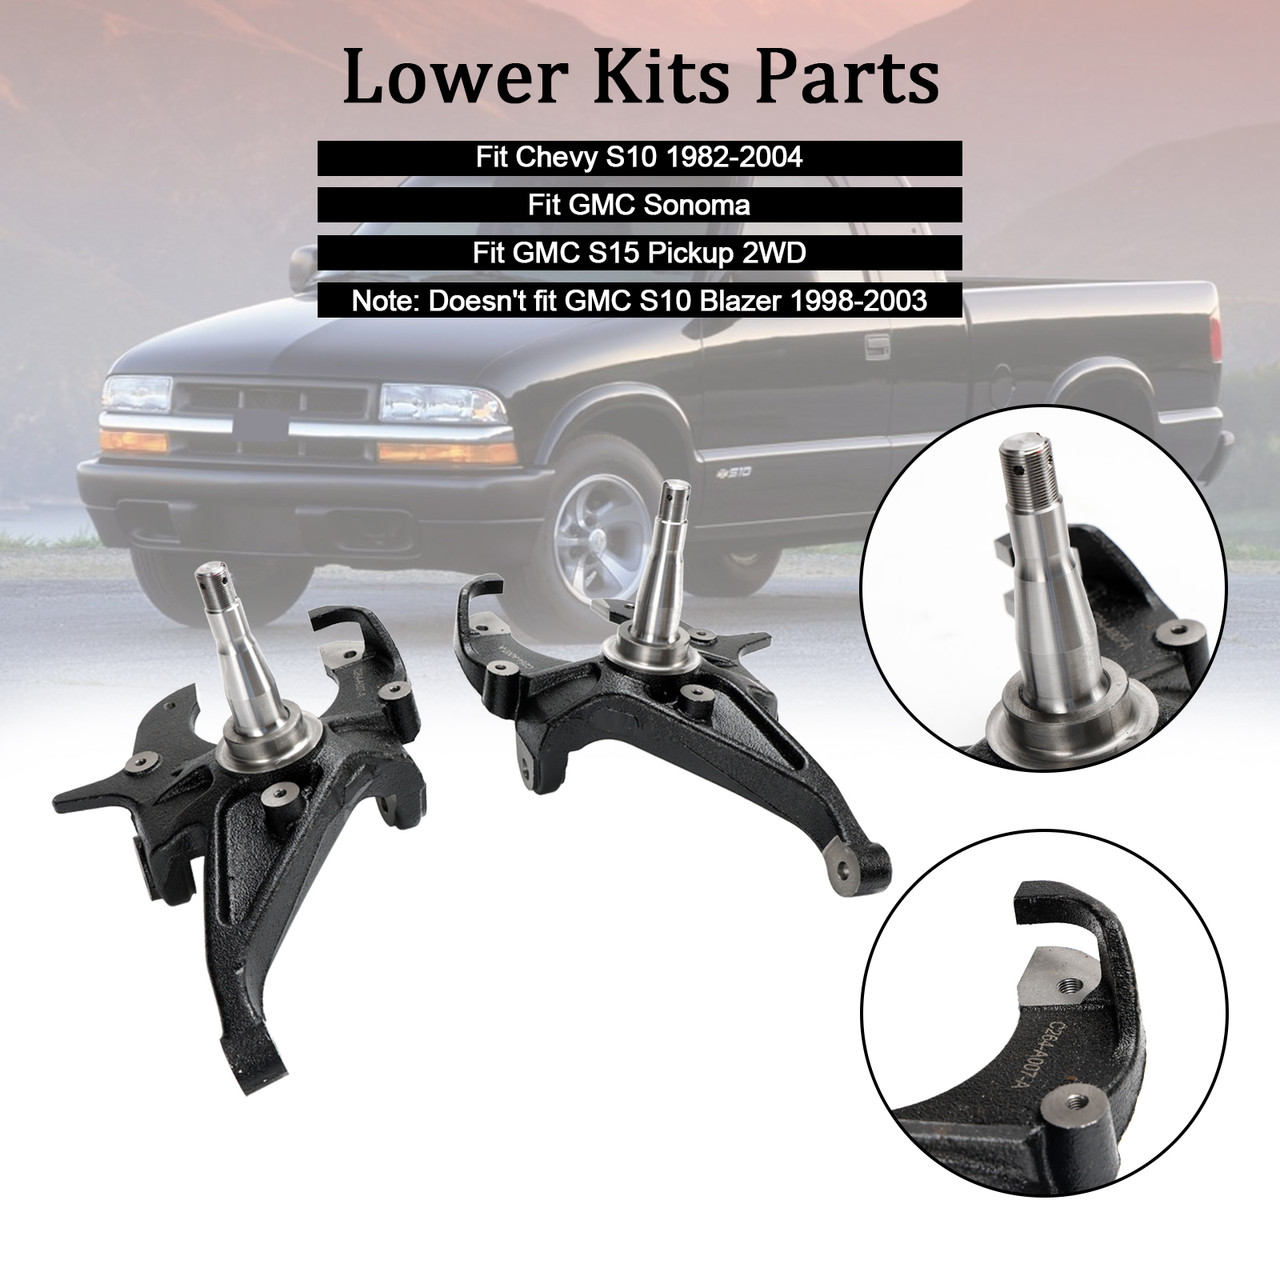 2" Drop Front Spindles fit Chevy S10 1982-2004 fit GMC S15 Sonoma Lowering Kit